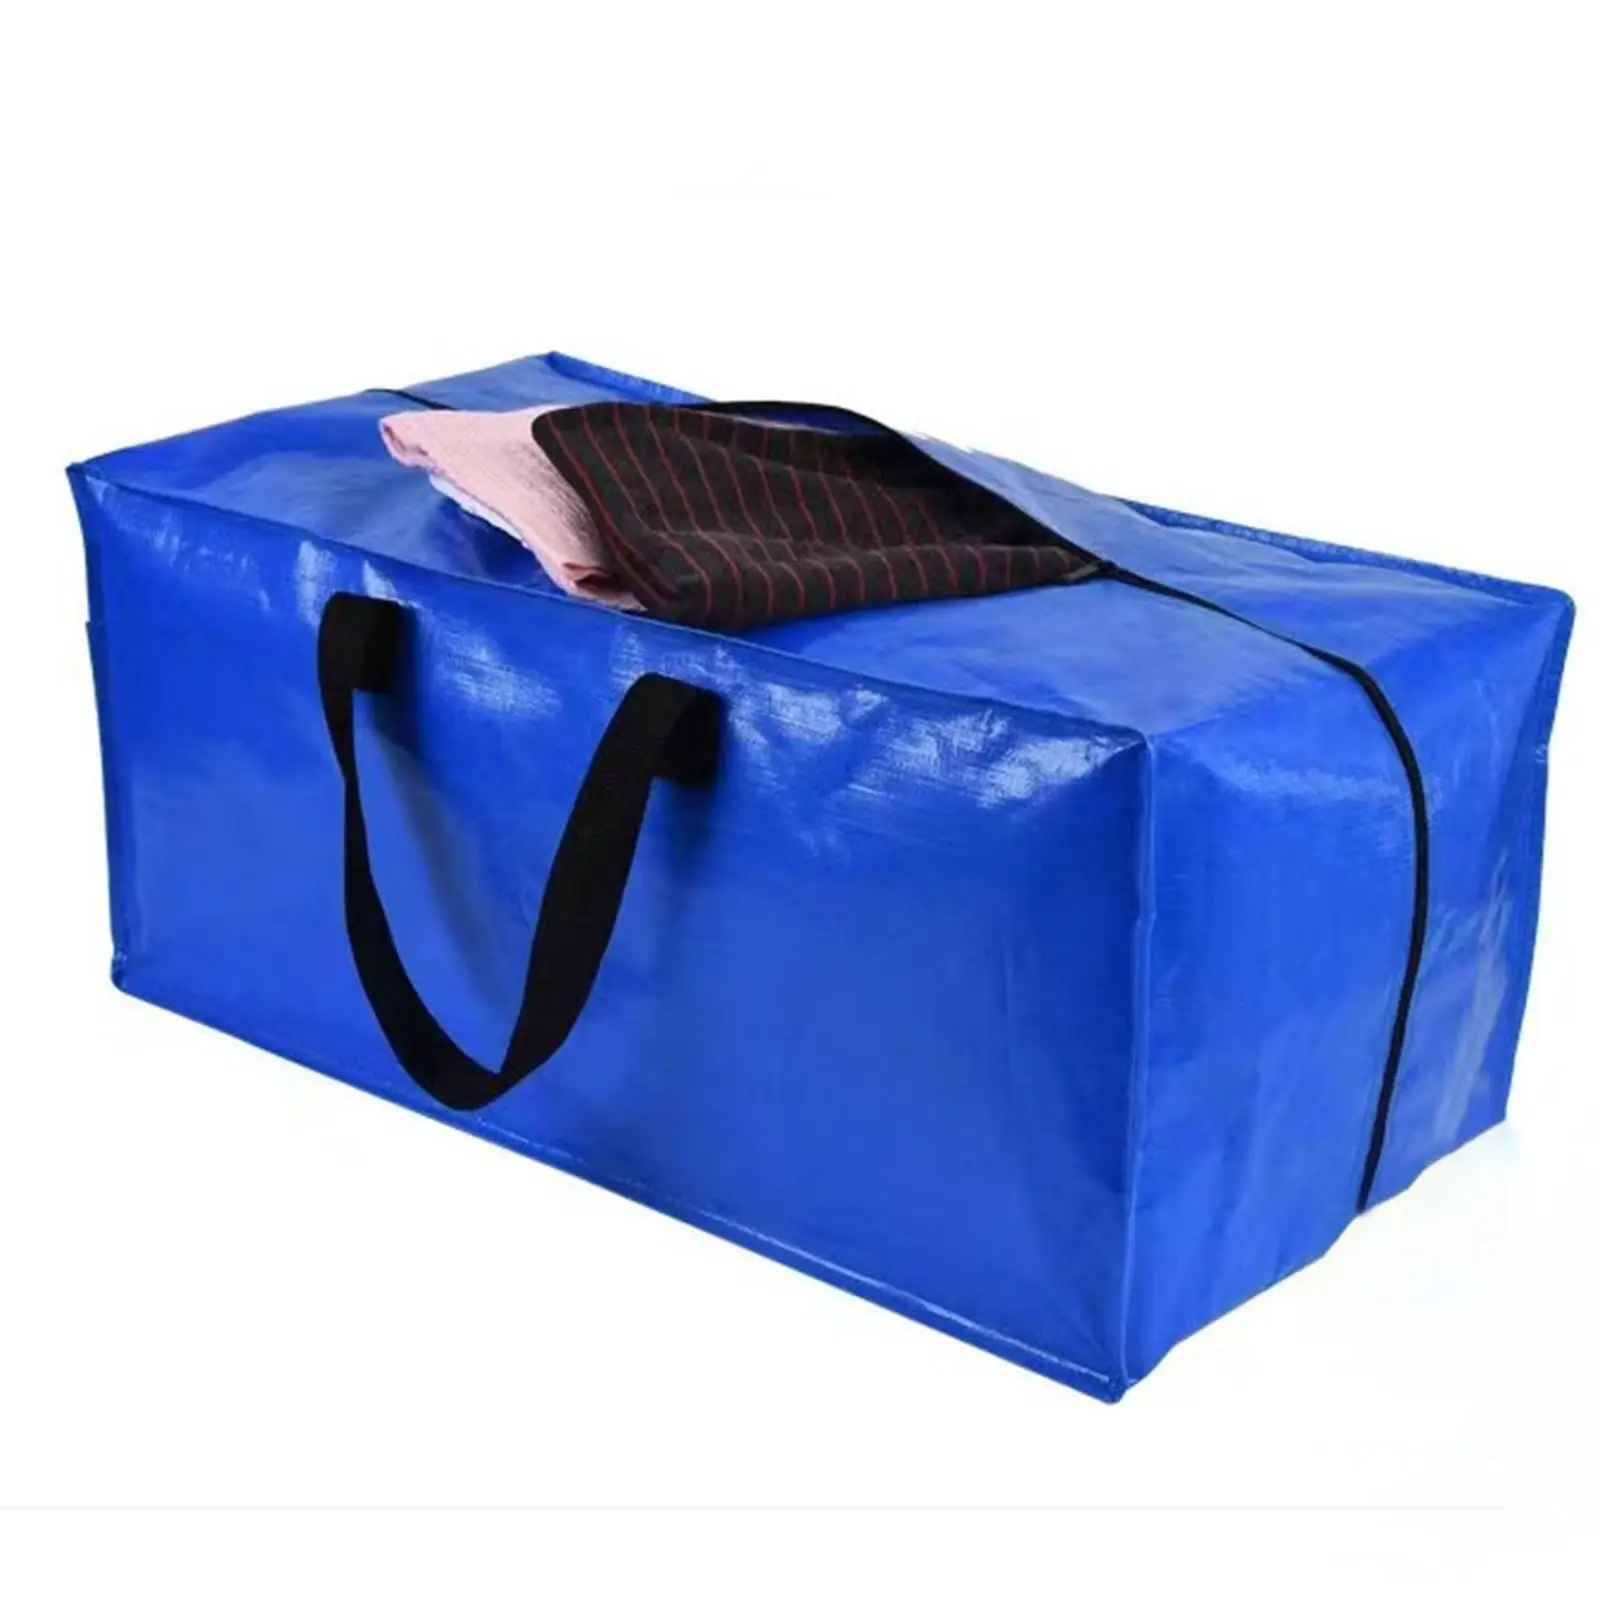 Large Moving Bags, Storage Totes with Zippers, Double Handles, Packing Bags, Laundry Bag for Travel, Bedroom, Home, Laundry